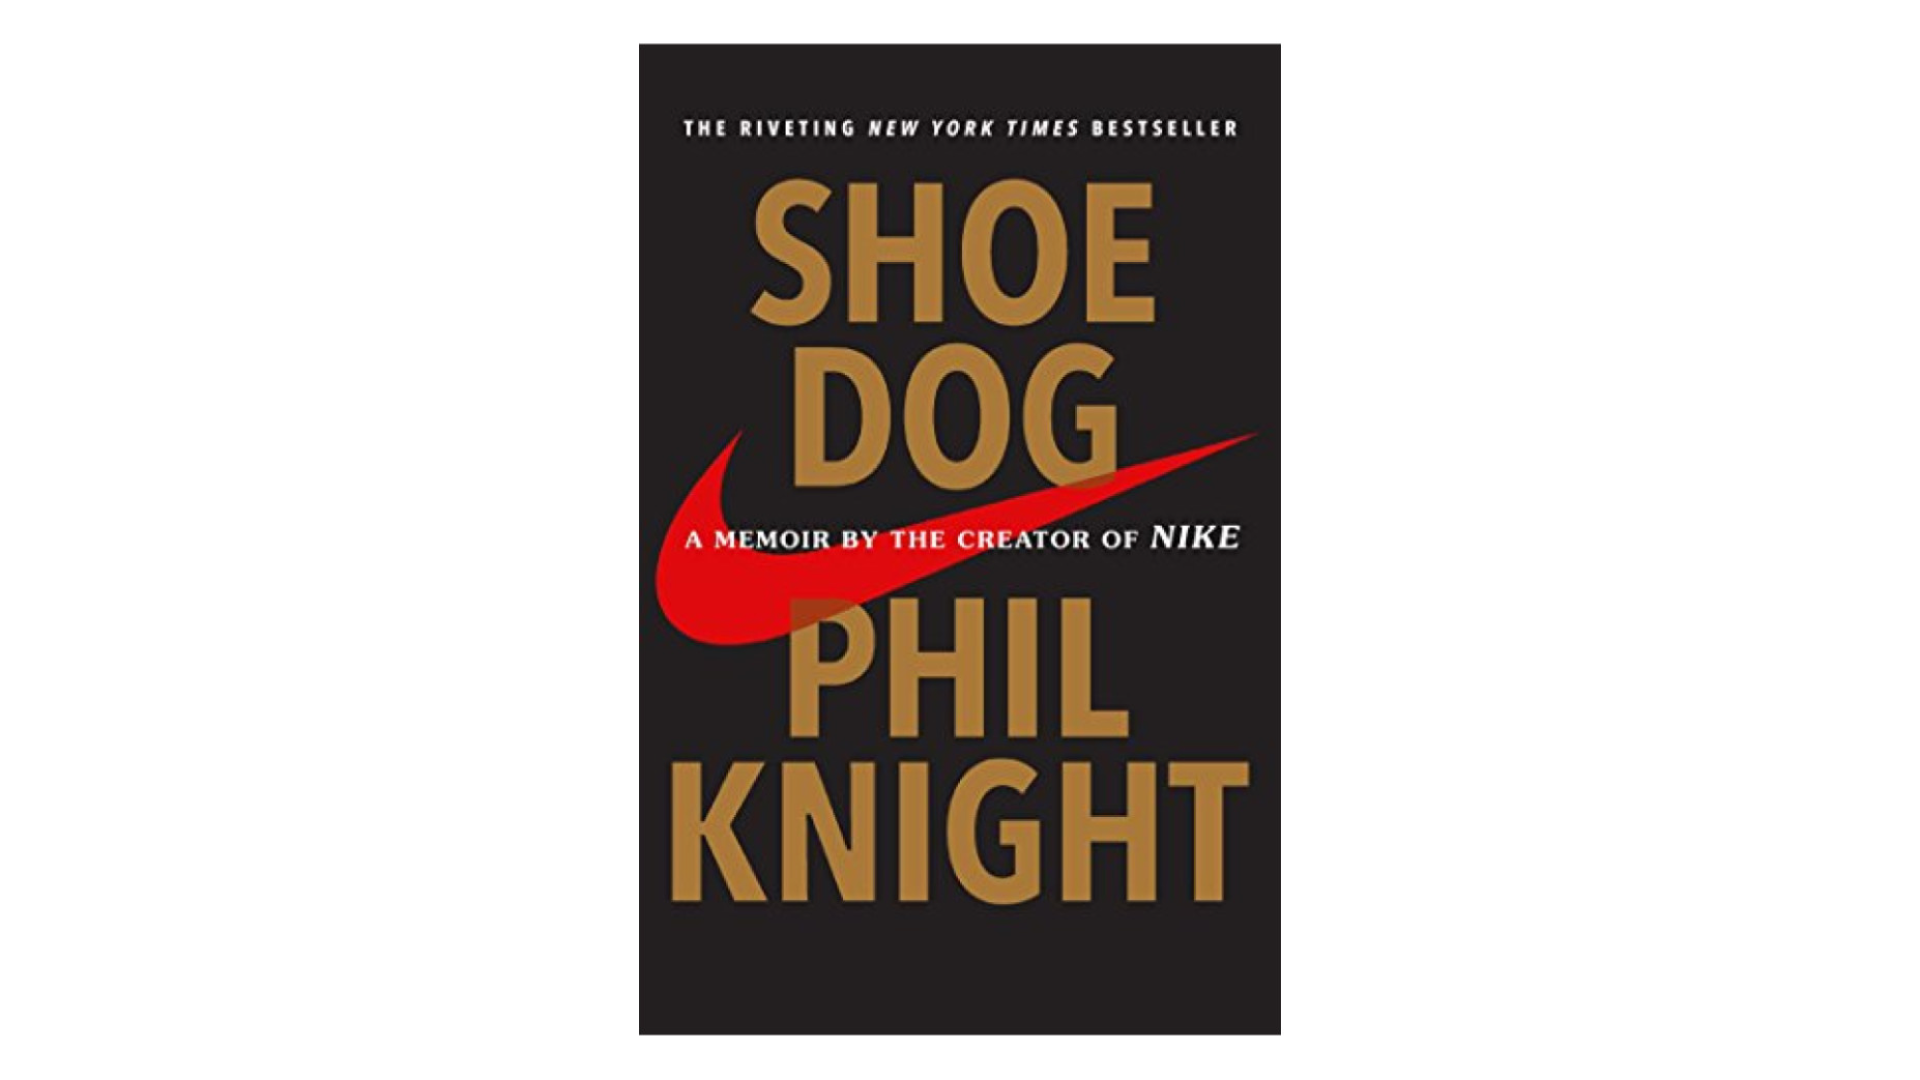 "Shoe Dog" by Phil Knight